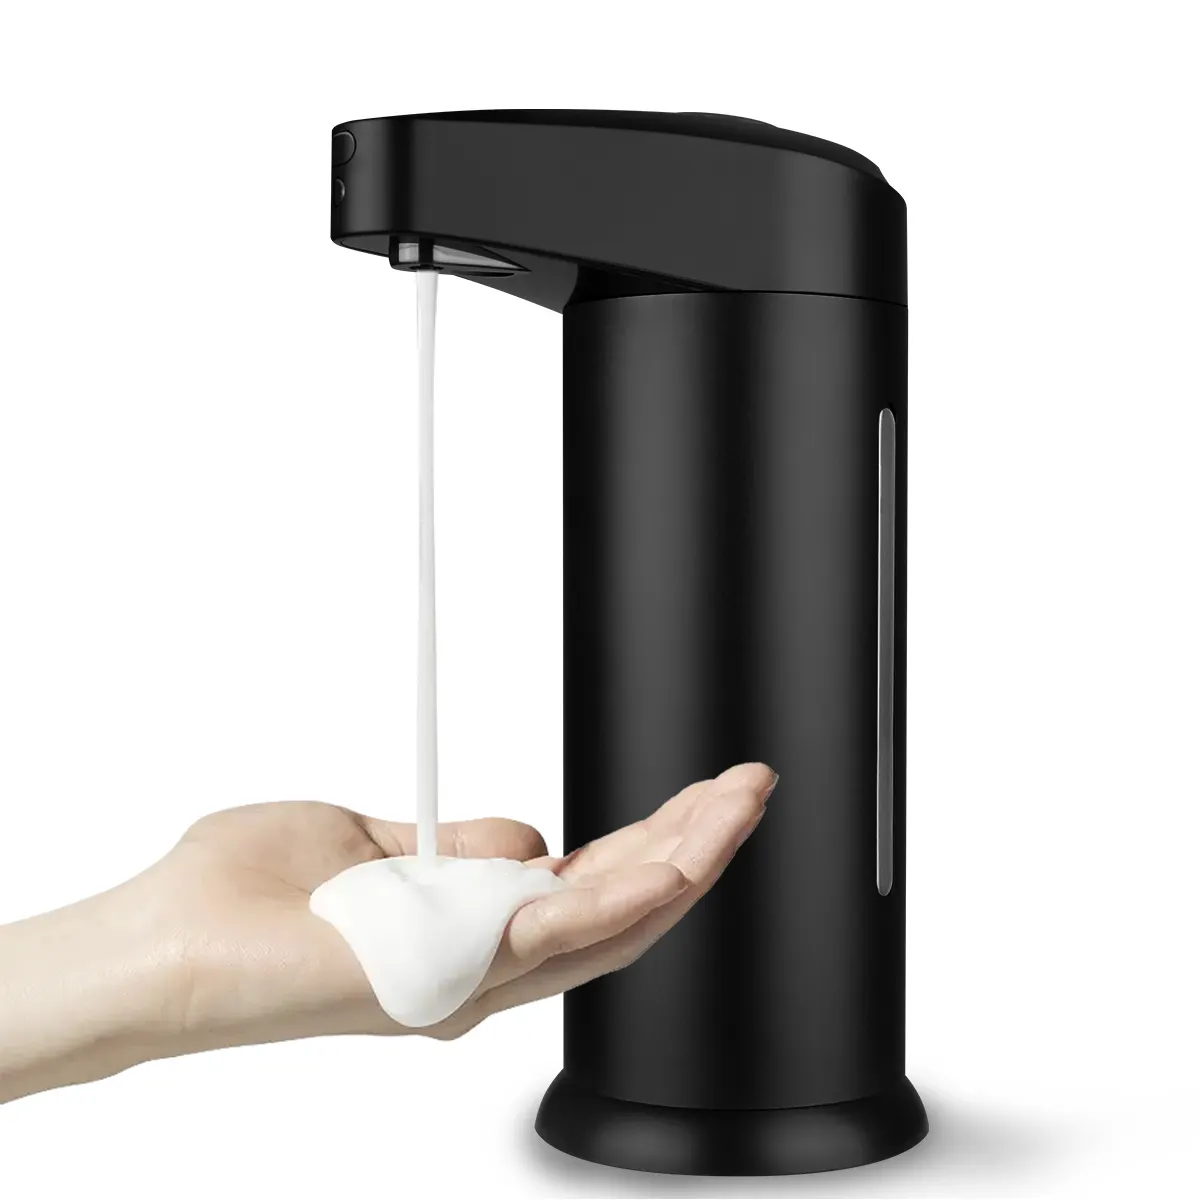 Automatic Soap Dispenser, Alcohol Spray Hospital Hand Sanitizer Machine Soap Dispenser Touchless Wall Mounted Motion Sensor